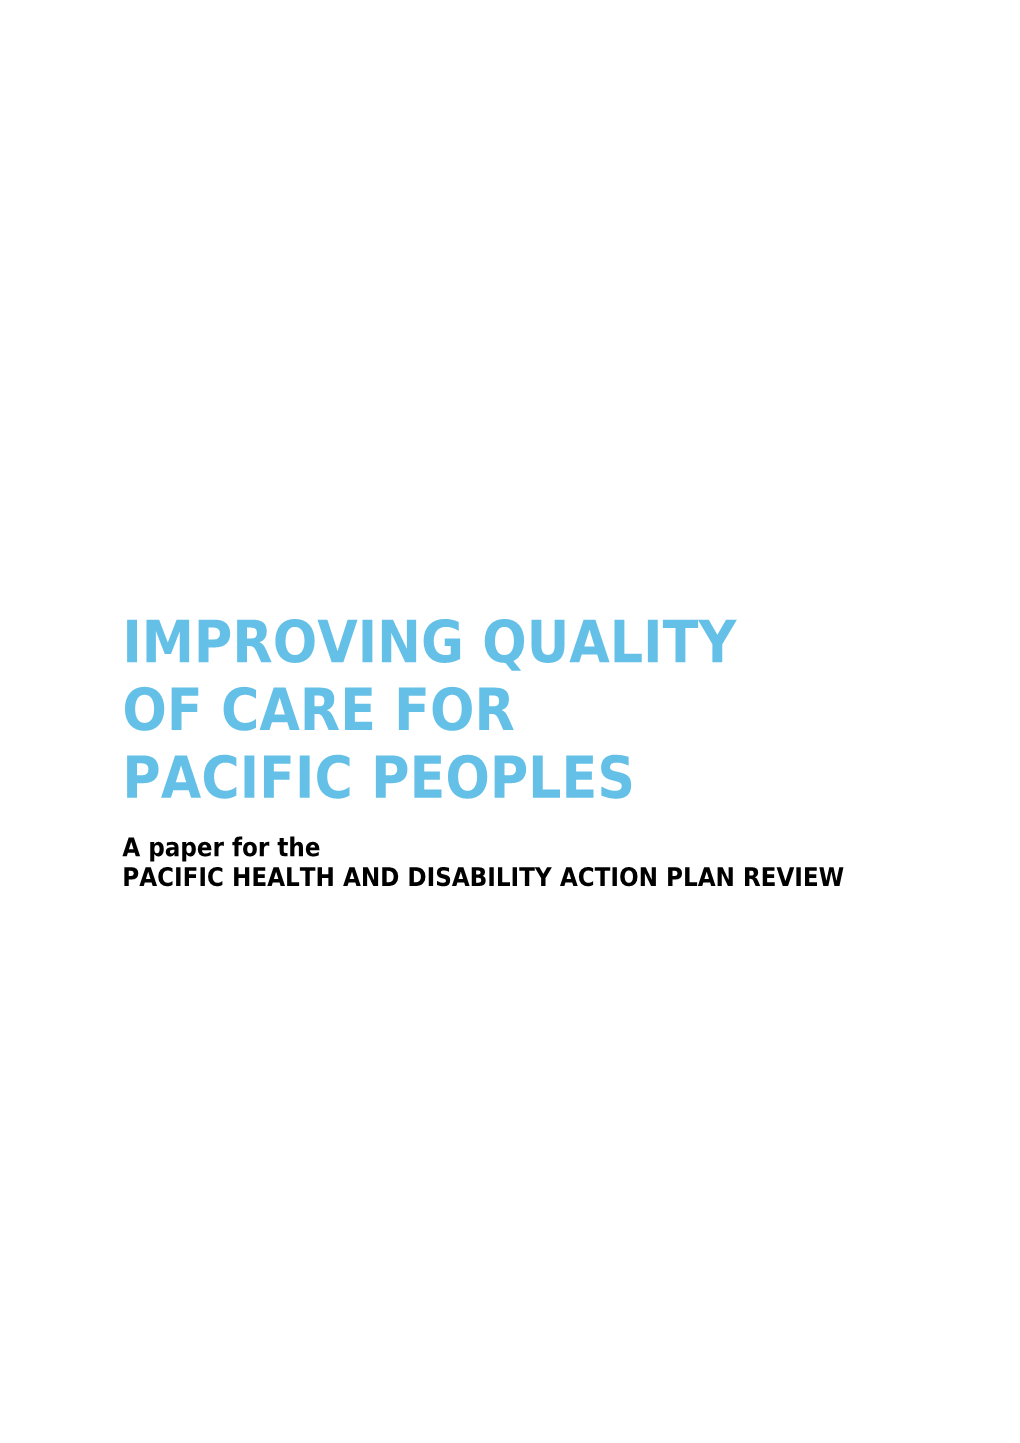 IMPROVING QUALITY of CARE for Pacific Peoples